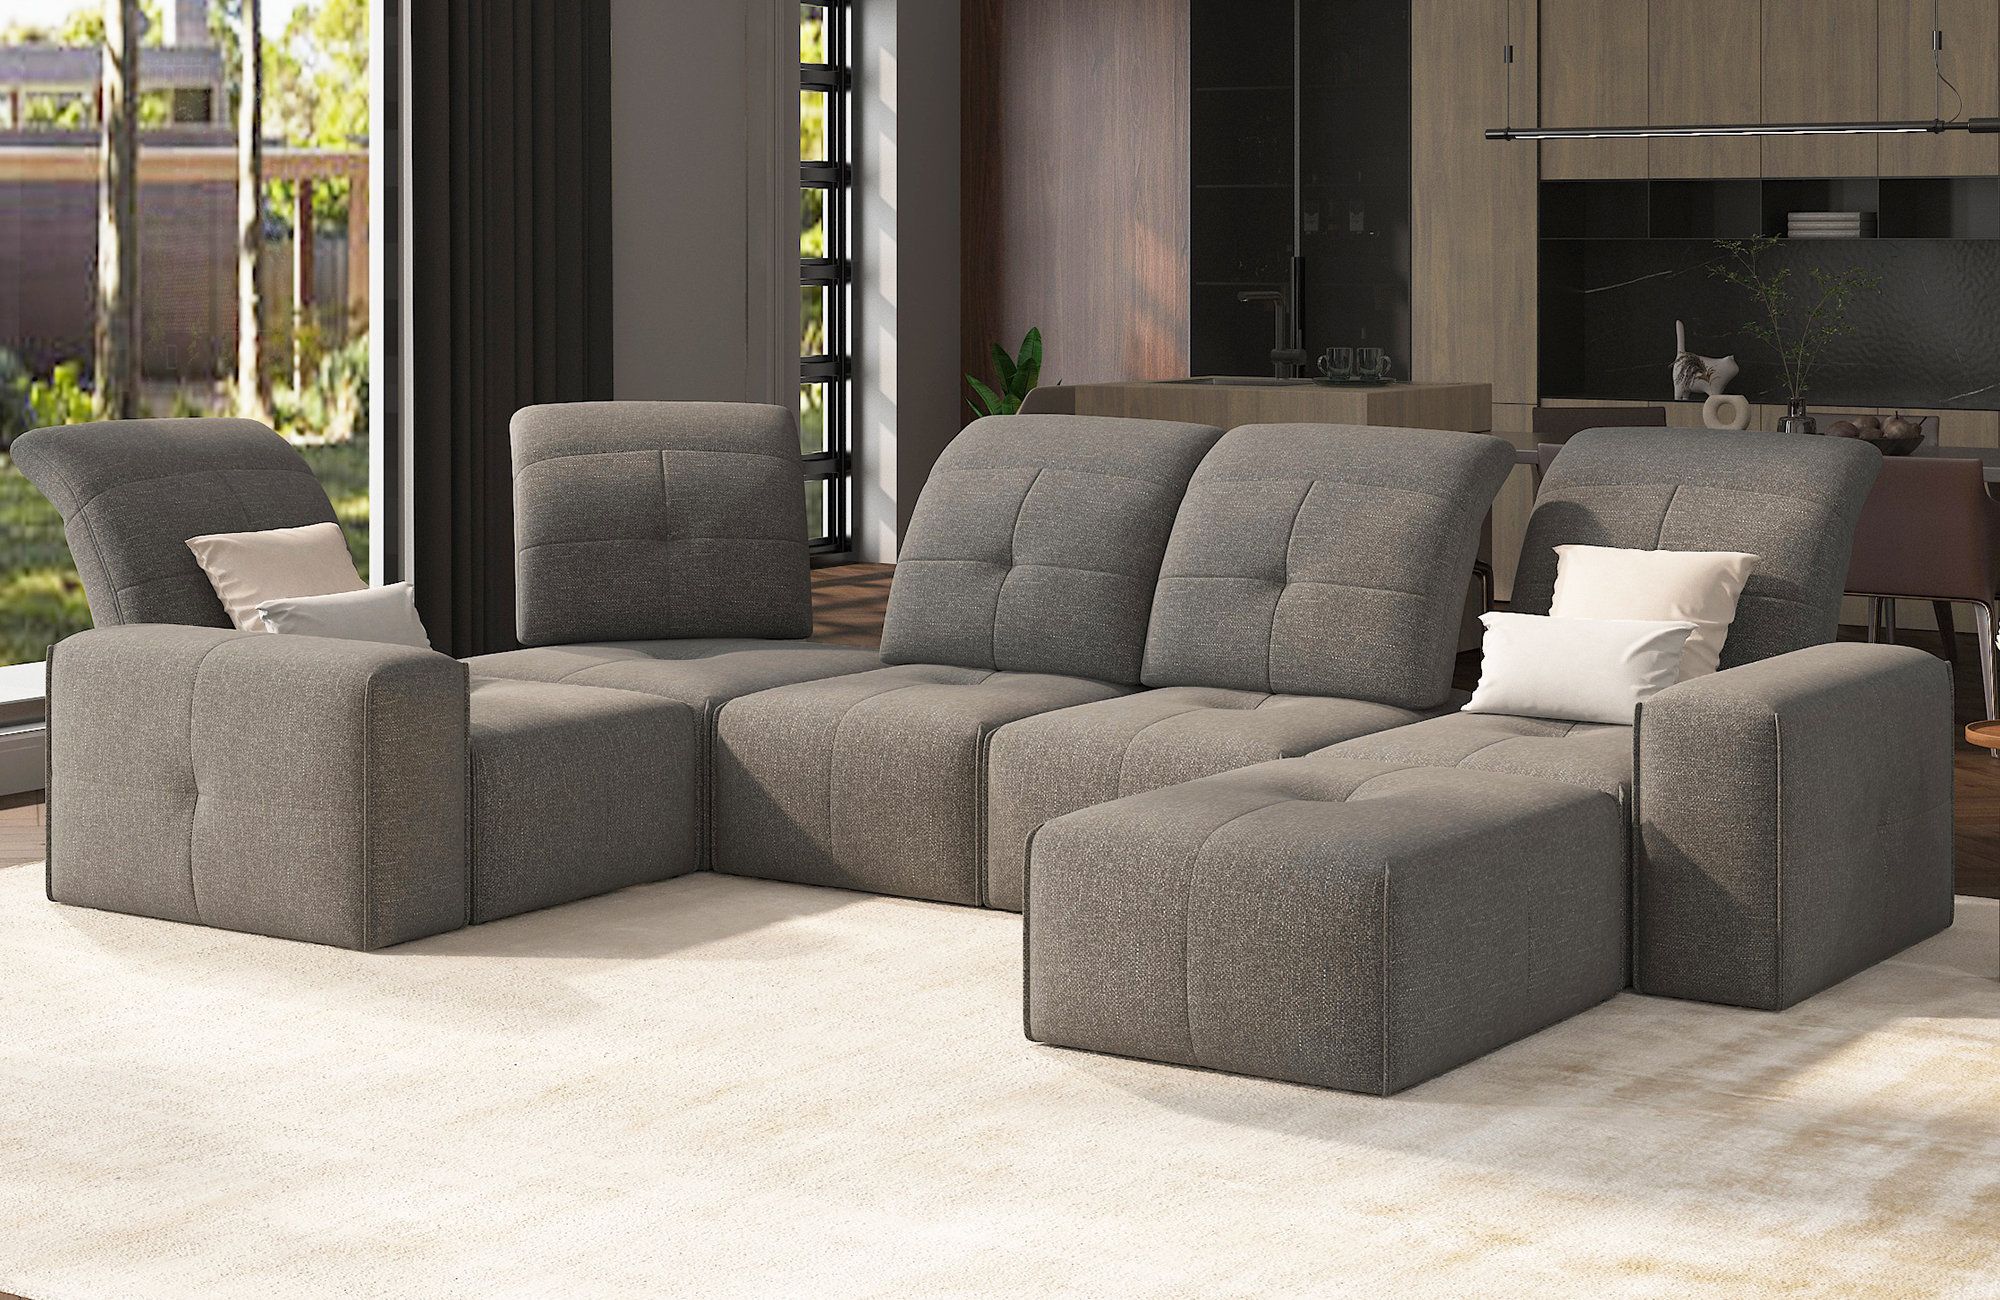 Amerlife Sectional, Modular Sofa With Recliner  6 Seats Corner Couch With  Ottoman, Adjustable Backrests And Headrests | Wayfair With Regard To 6 Seater Modular Sectional Sofas (Gallery 12 of 20)